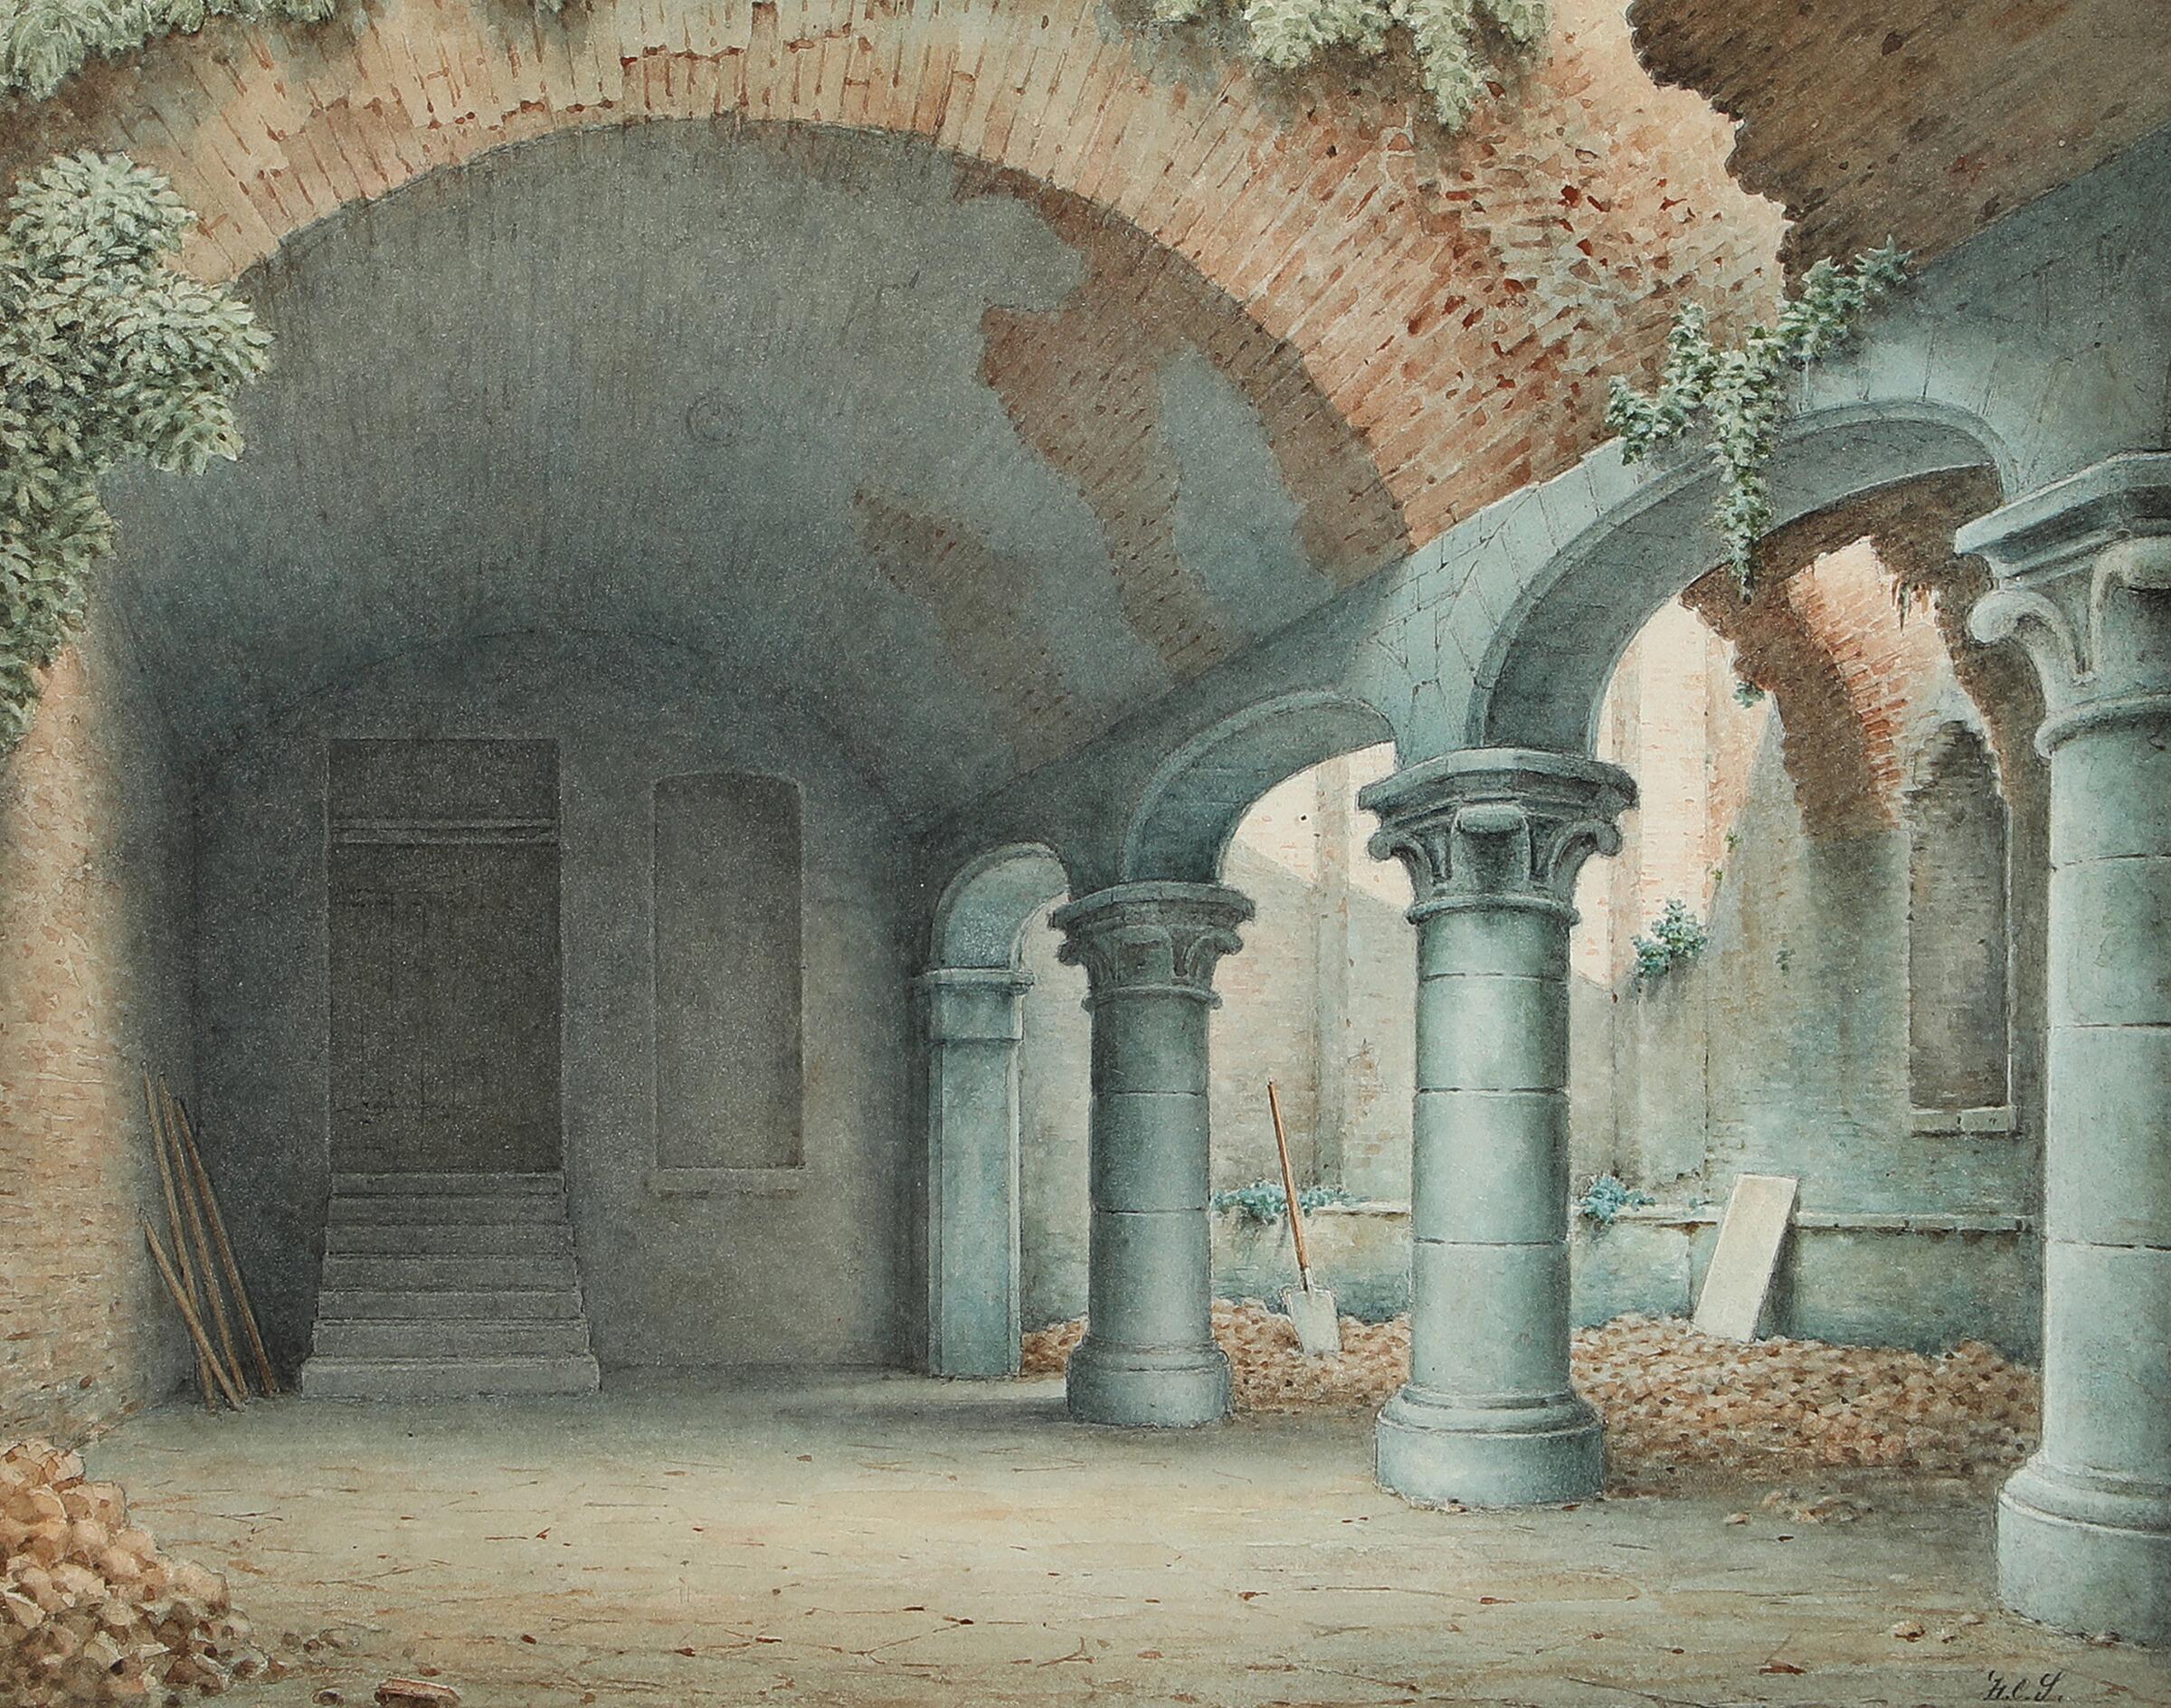 Danish Ruins of a Monastery Courtyard, Signed and Dated by Harald Conrad Stilling, 1865